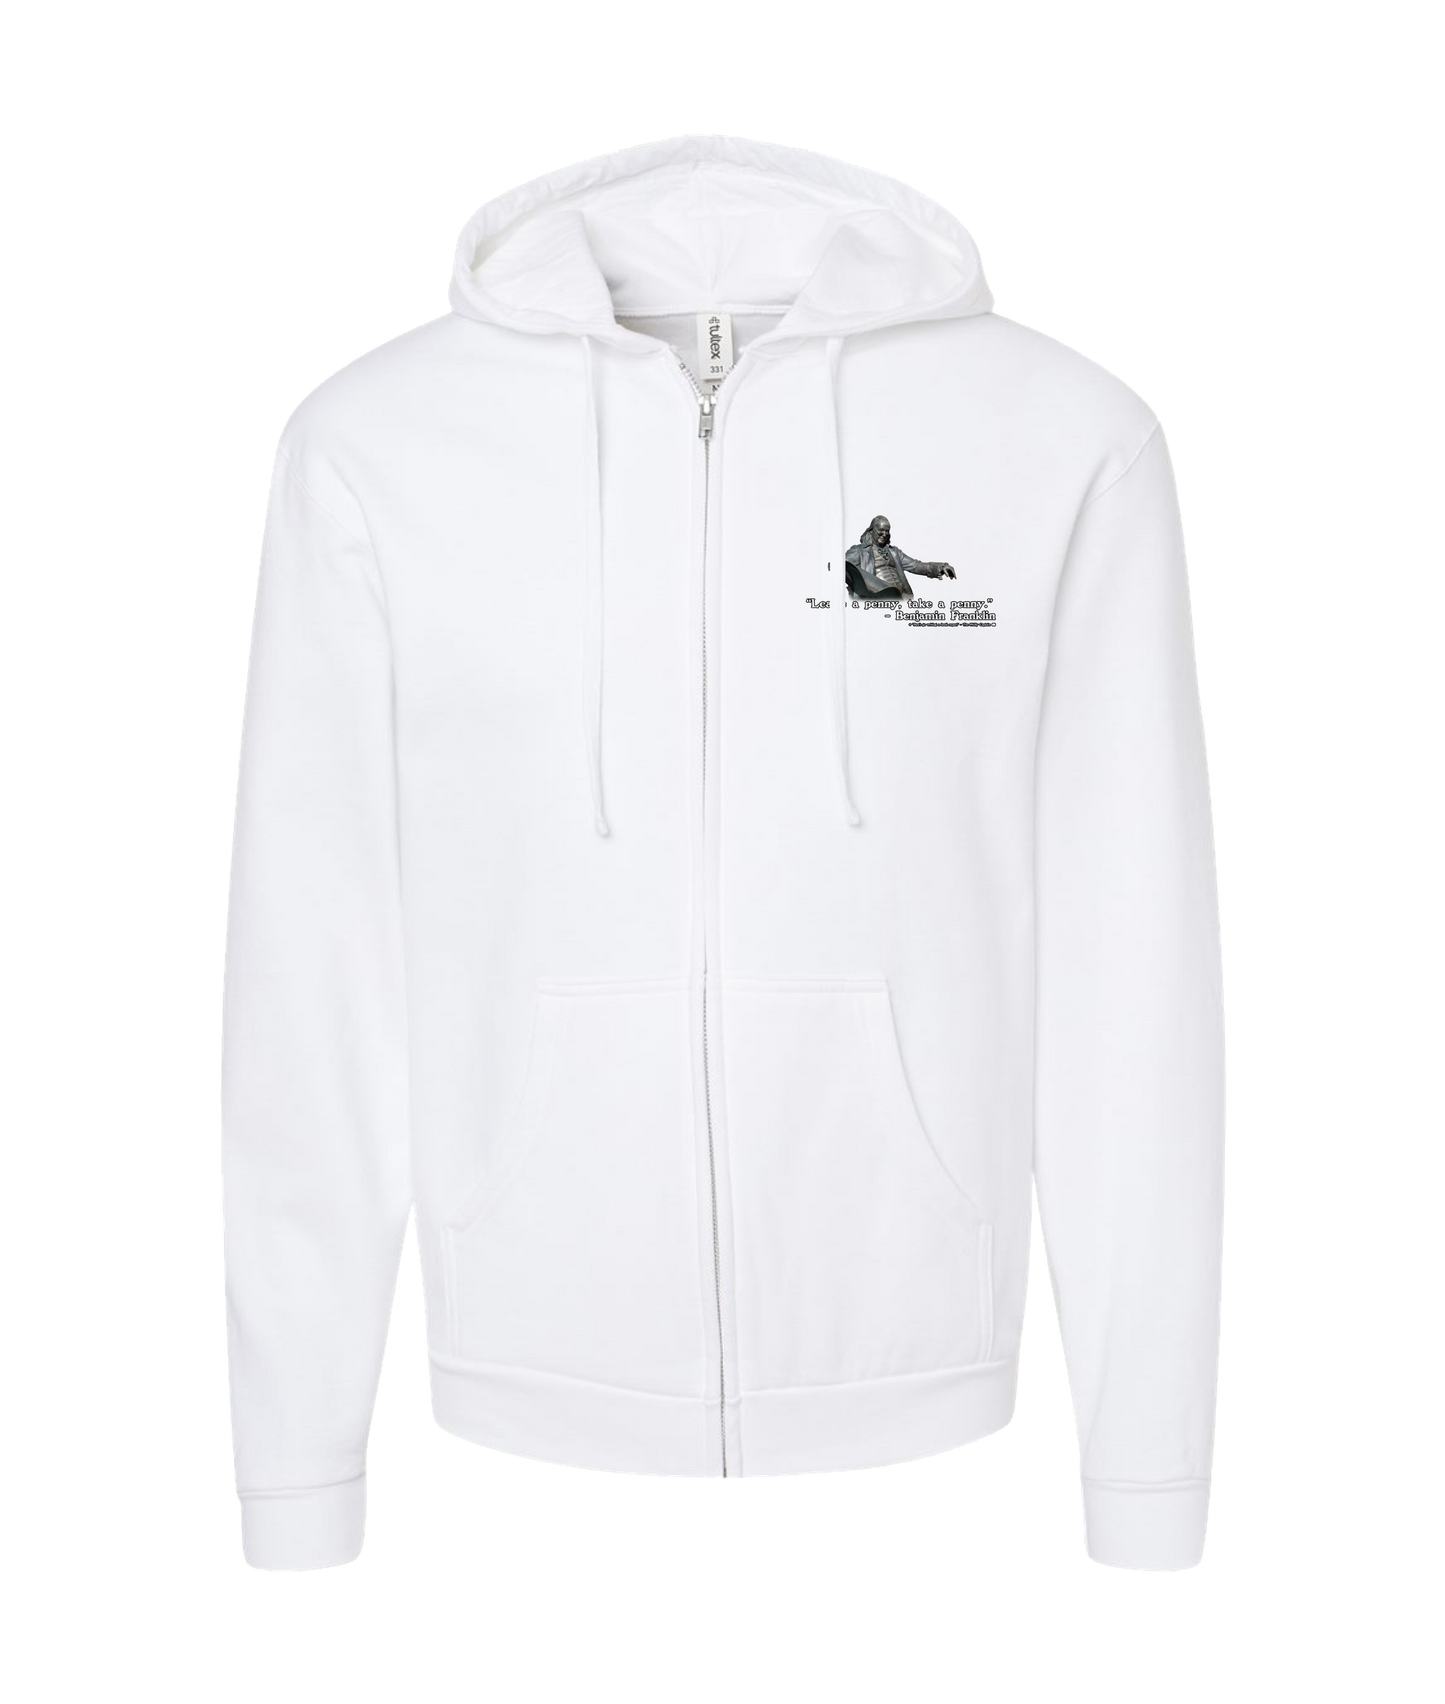 The Philly Captain's Merch is Fire - Leave a penny, take a penny - White Zip Up Hoodie